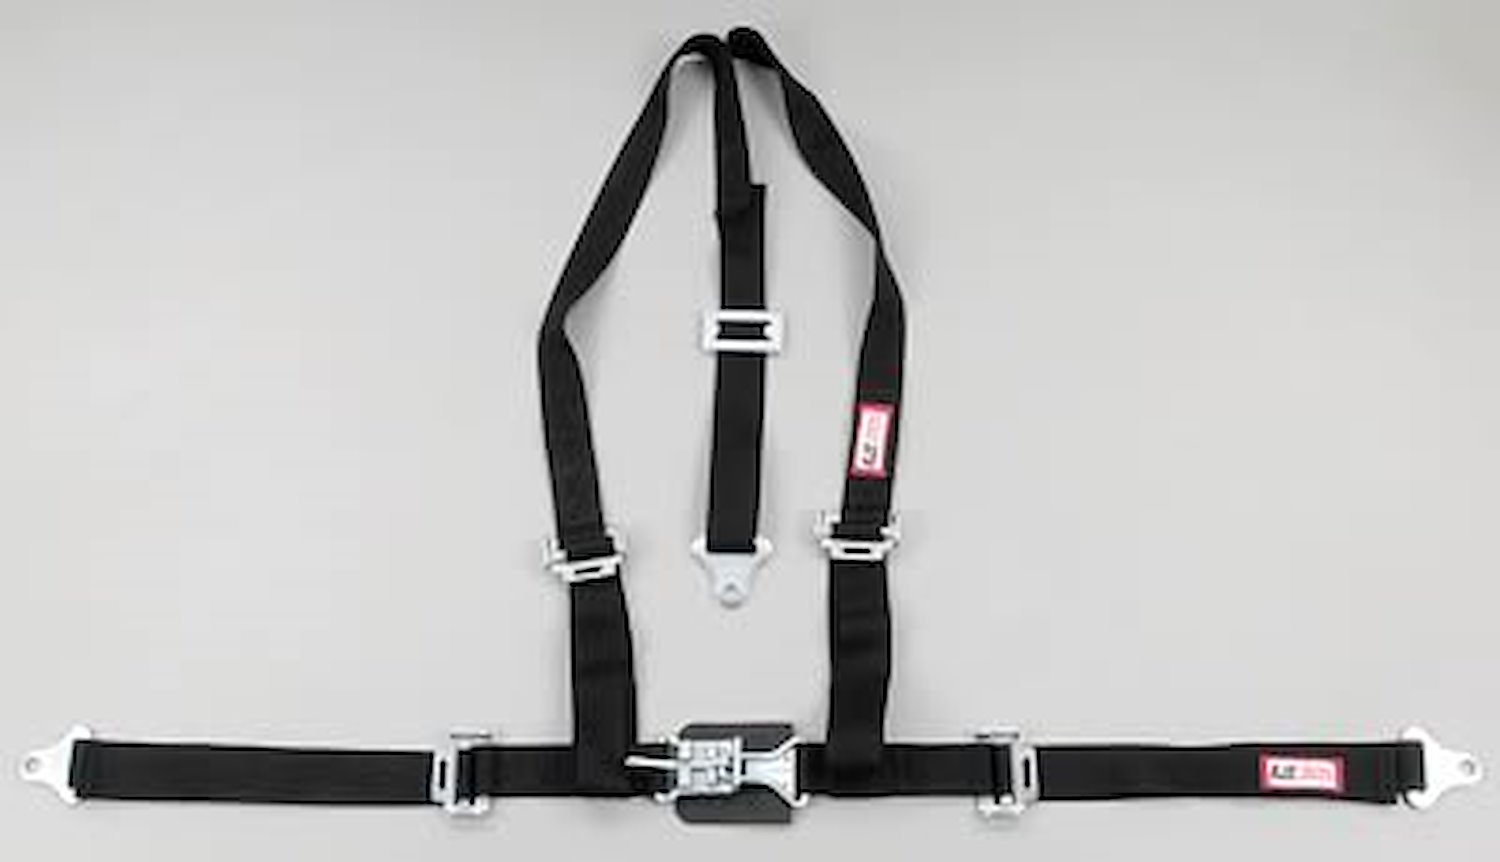 NON-SFI L&L HARNESS 2 PULL DOWN Lap Belt SNAP SEWN IN 2 S.H. Y FLOOR Mount WRAP/SNAP PURPLE